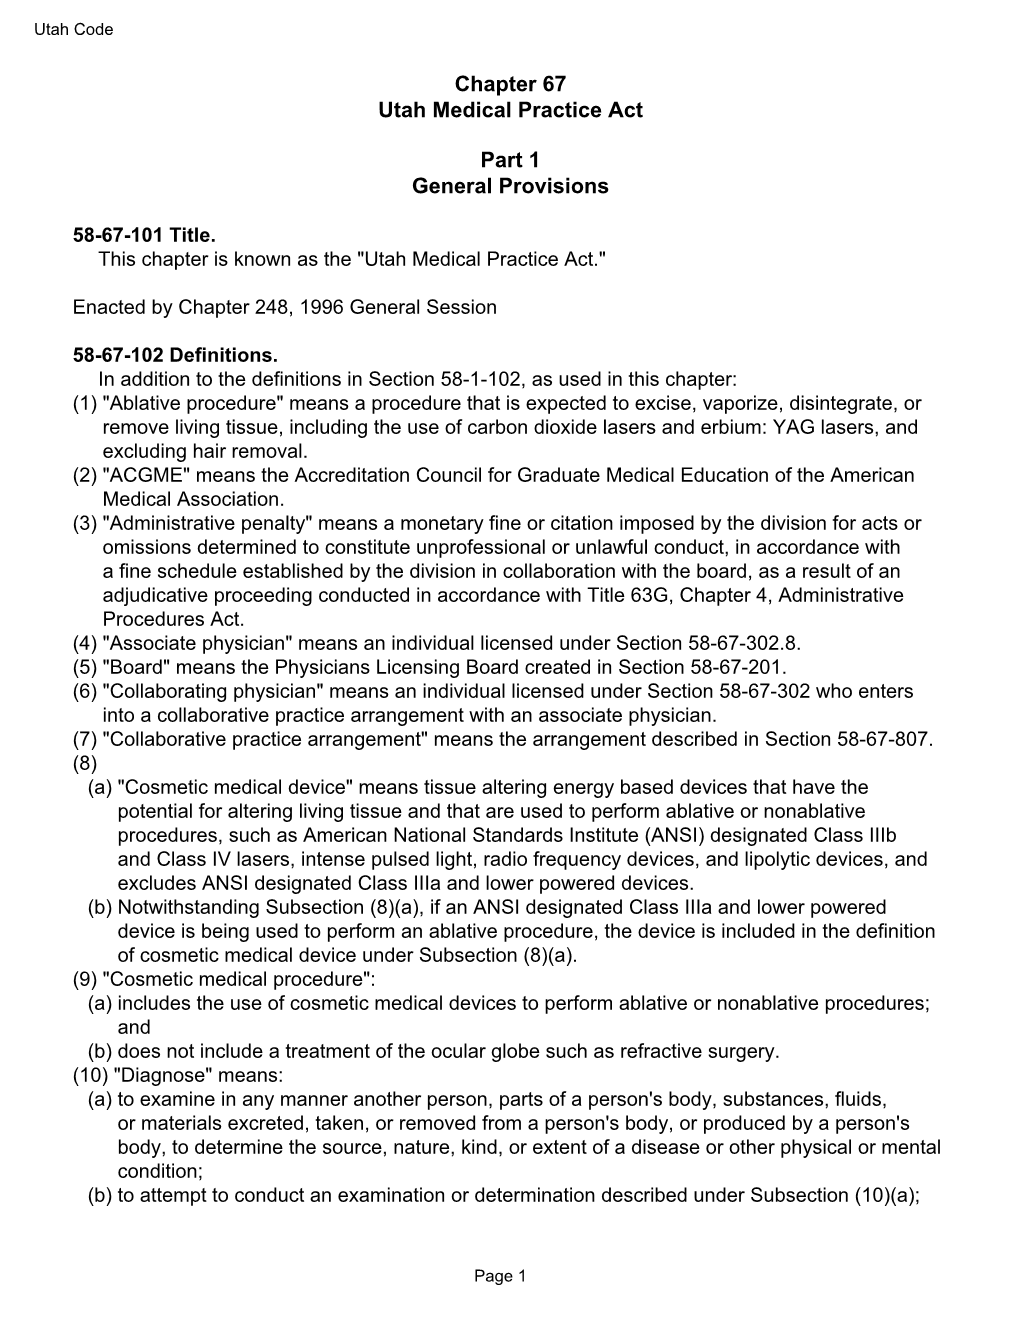 Chapter 67 Utah Medical Practice Act Part 1 General Provisions